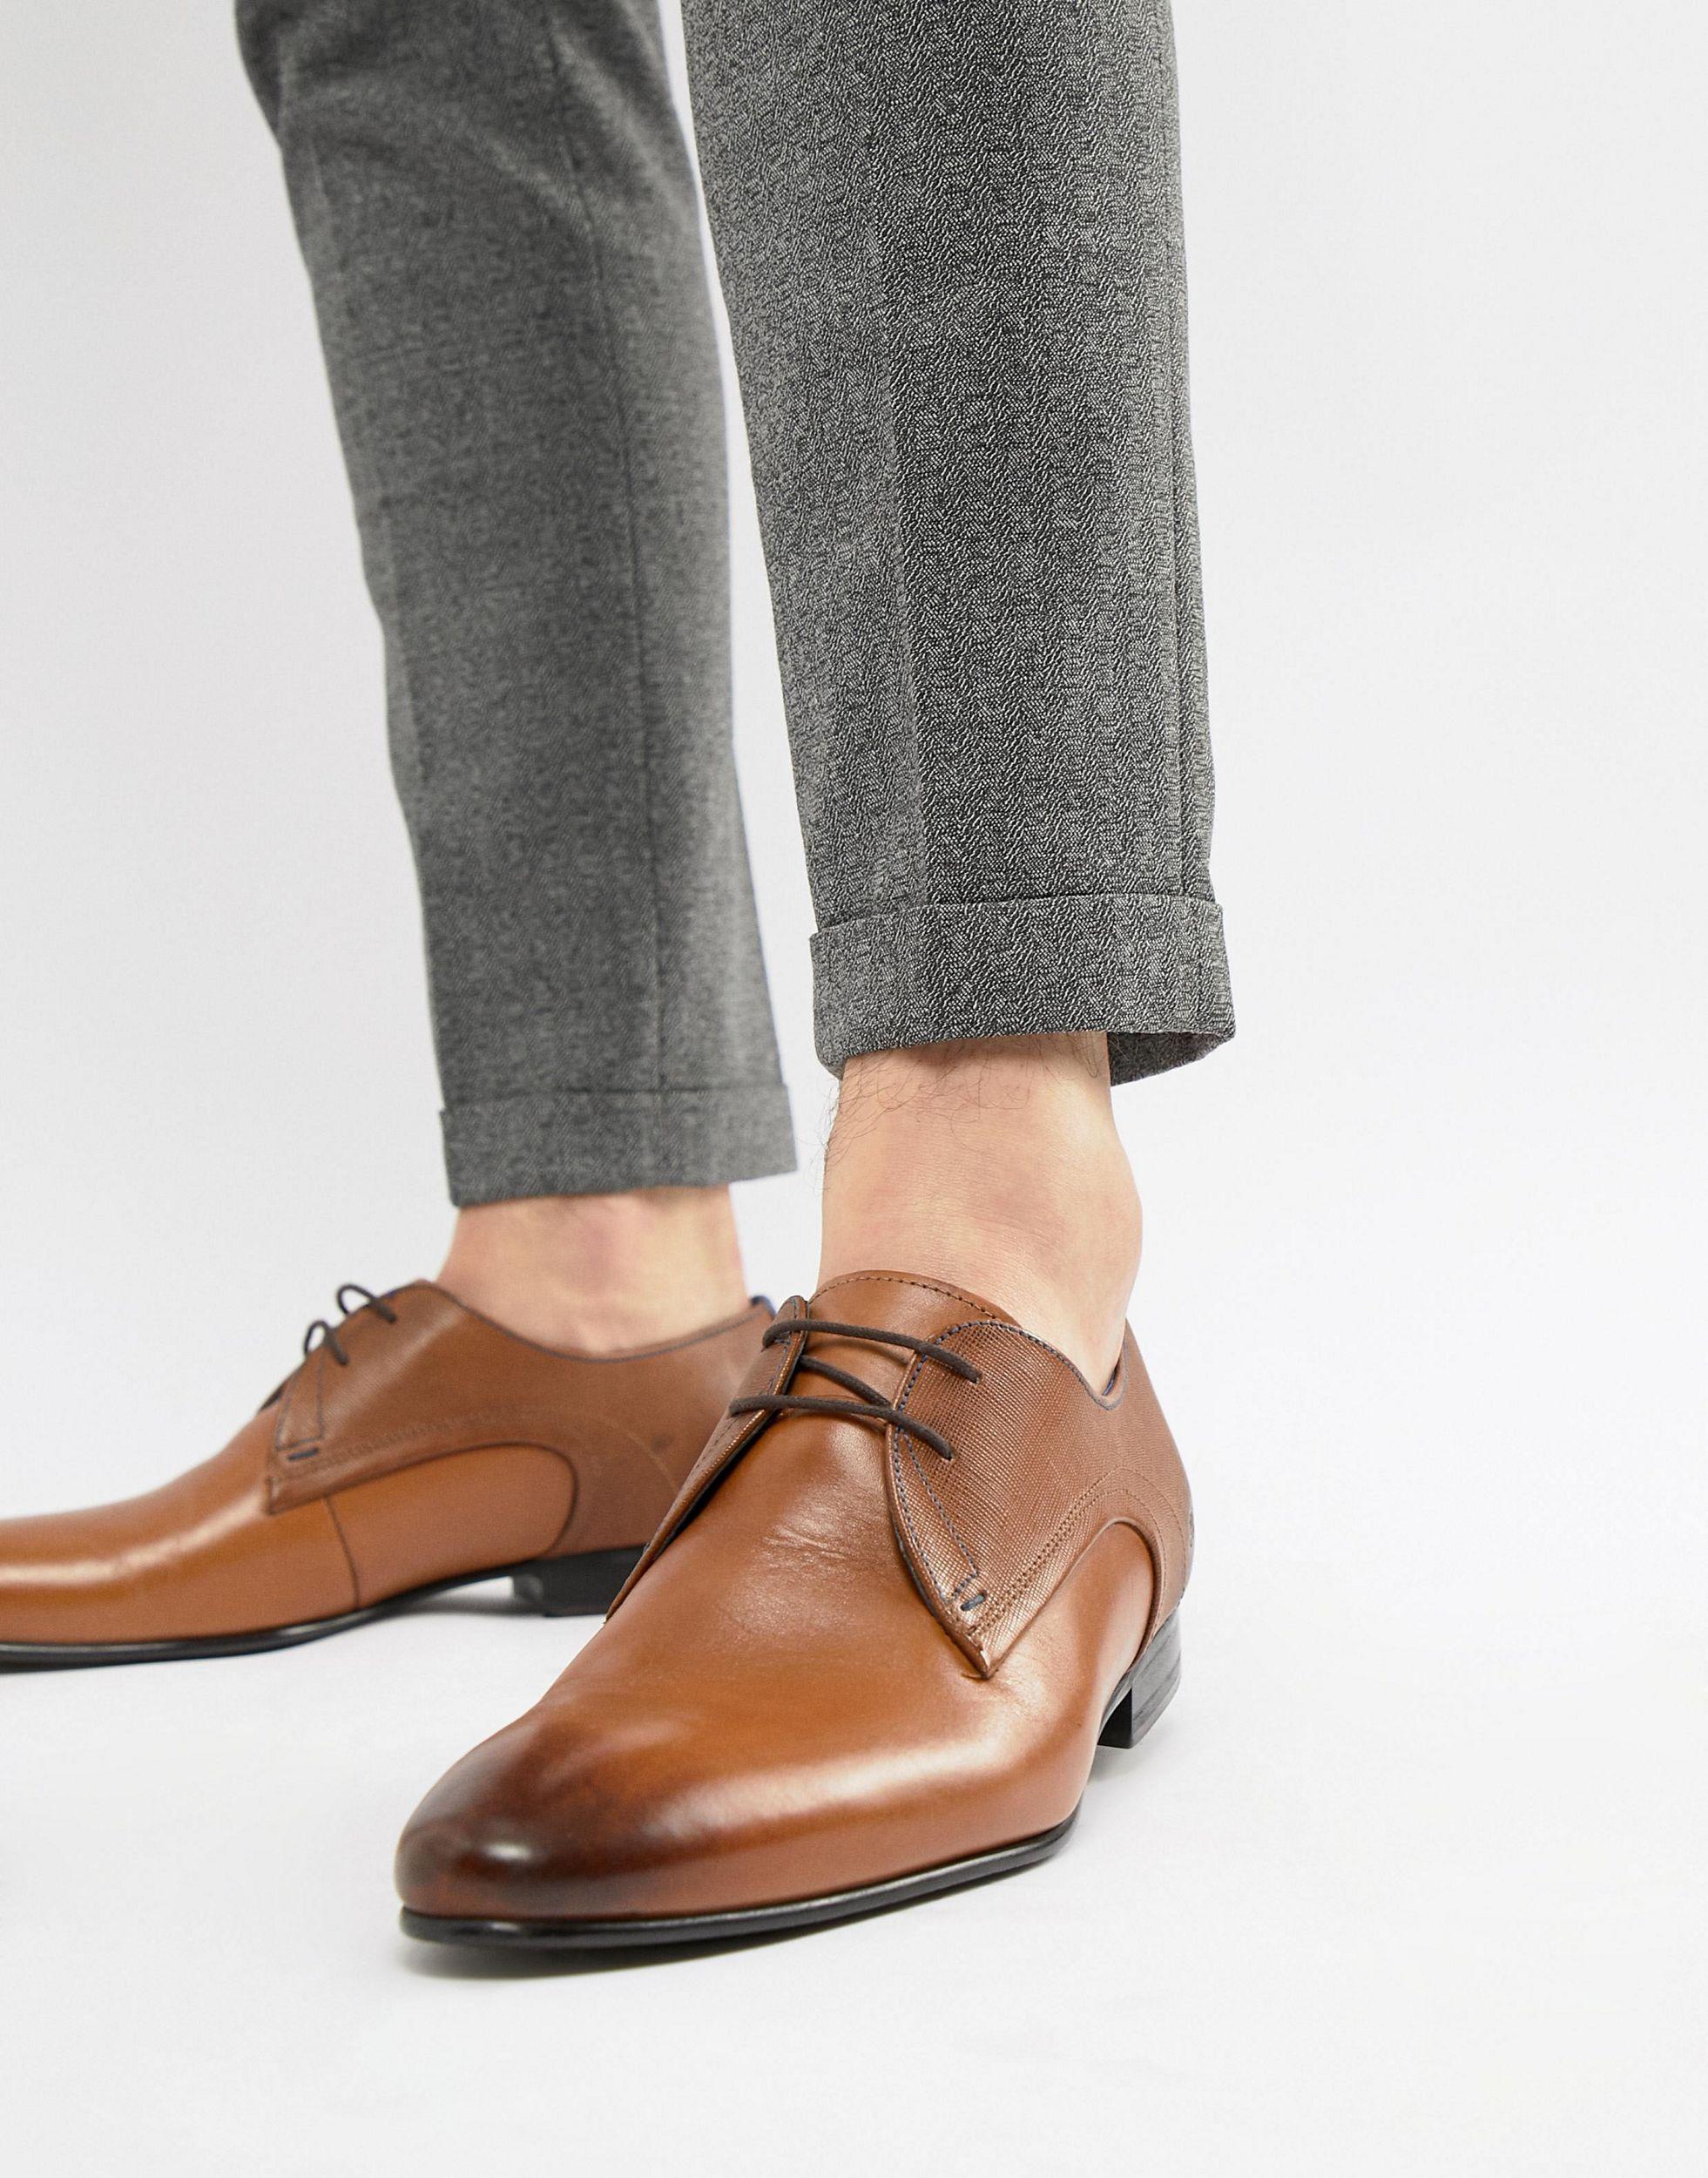 Ted Baker Tan Shoes | vlr.eng.br